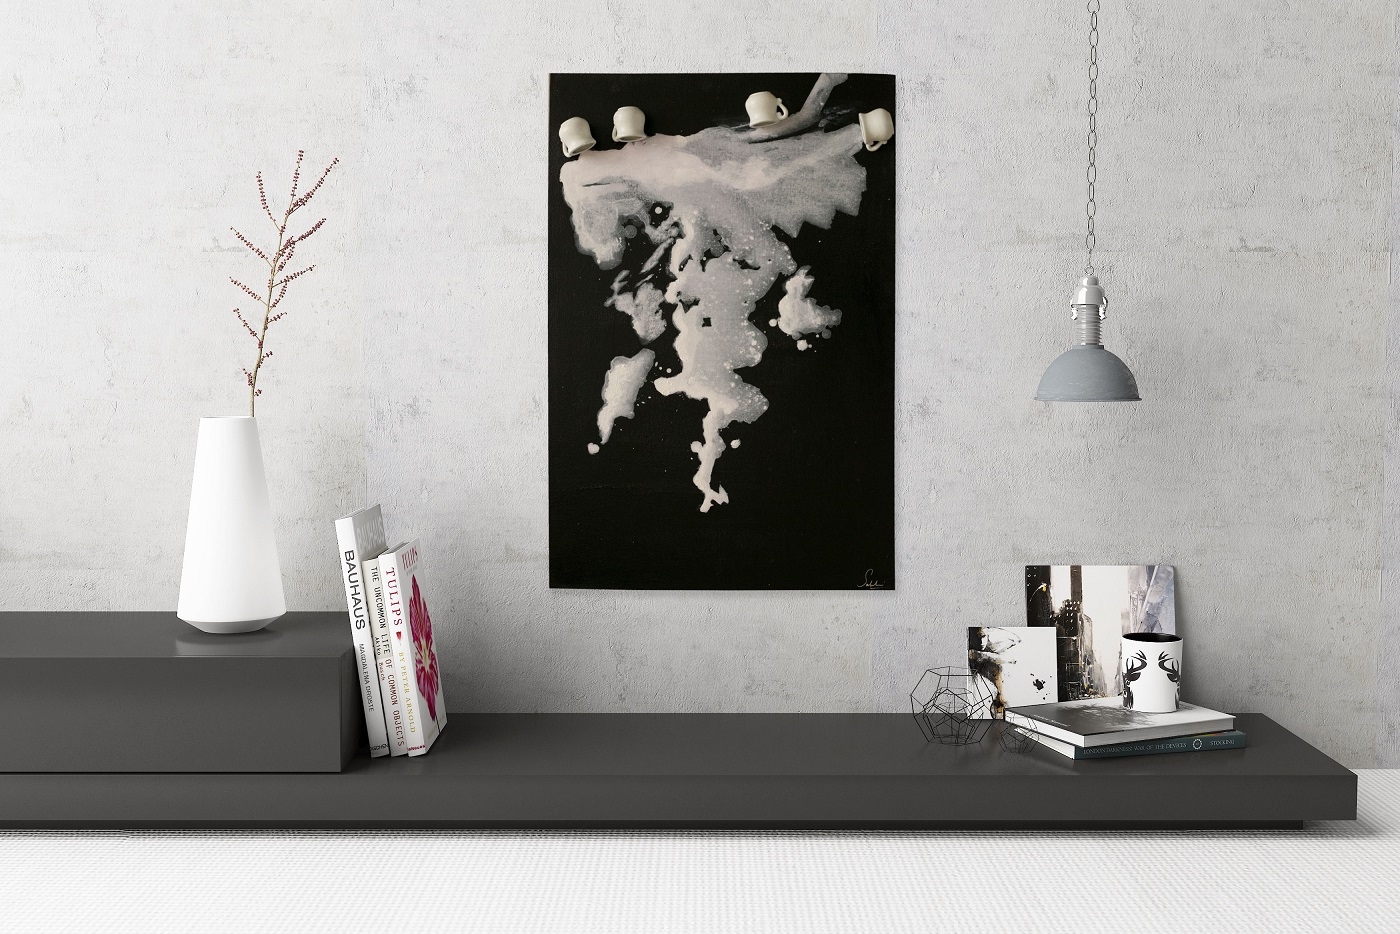 Isaaka launches a new collection of 3D paintings - Architect and ...